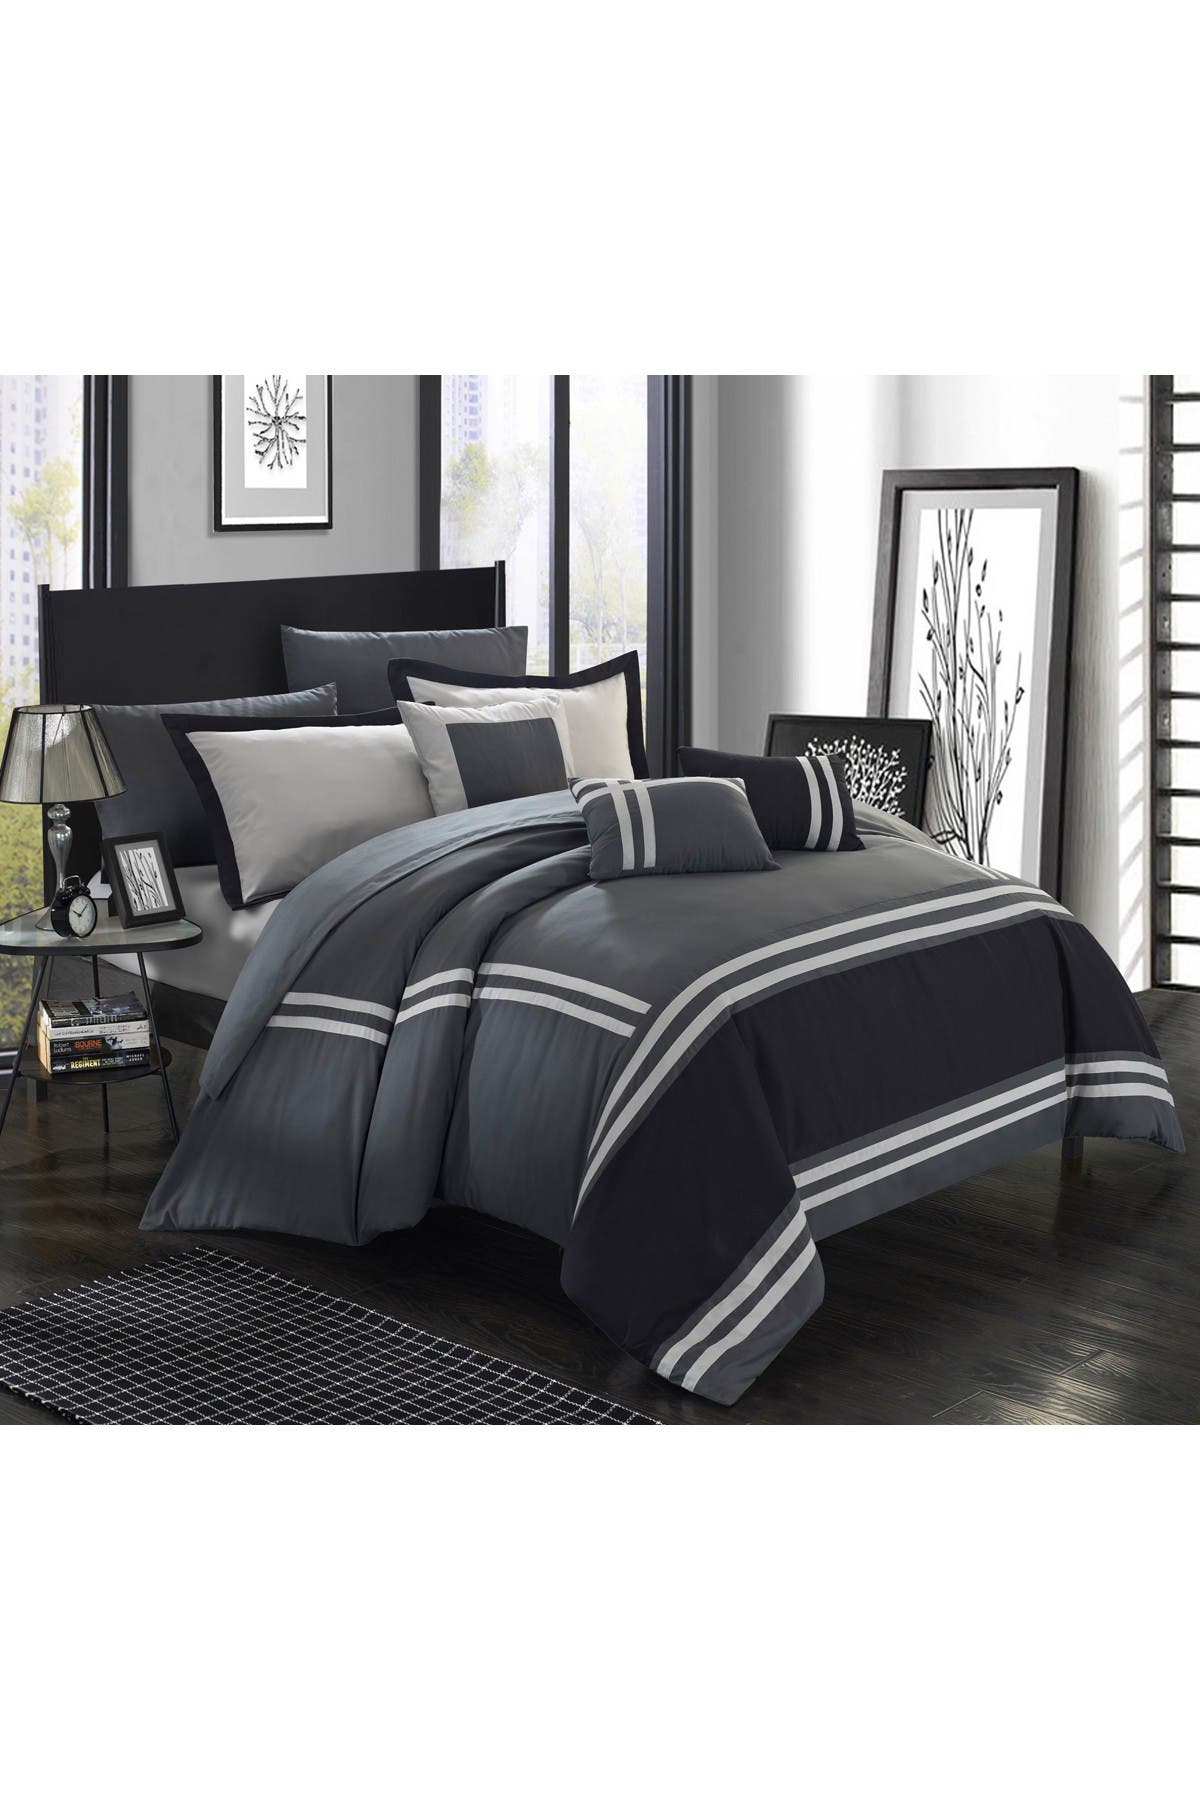 Chic Home Bedding Annabel Supersoft Oversized Pieced Color Block Banding Collection King Comforter 10 Piece Set Grey Nordstrom Rack